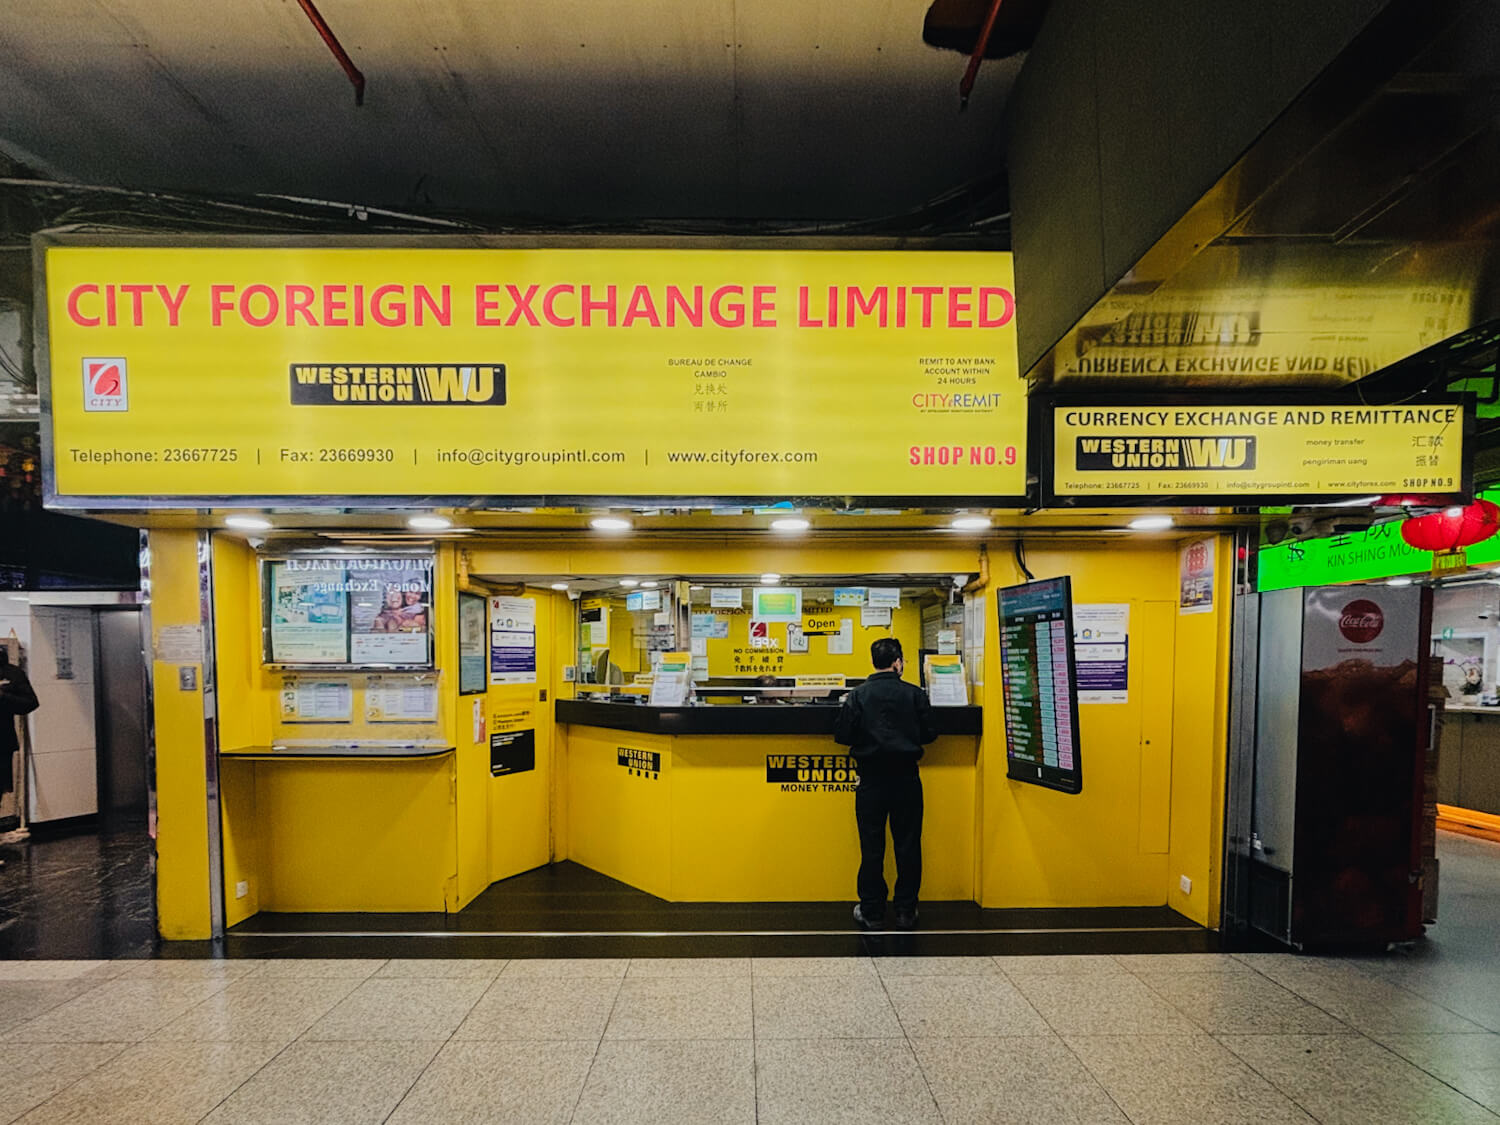 City Foreign Exchange Limited